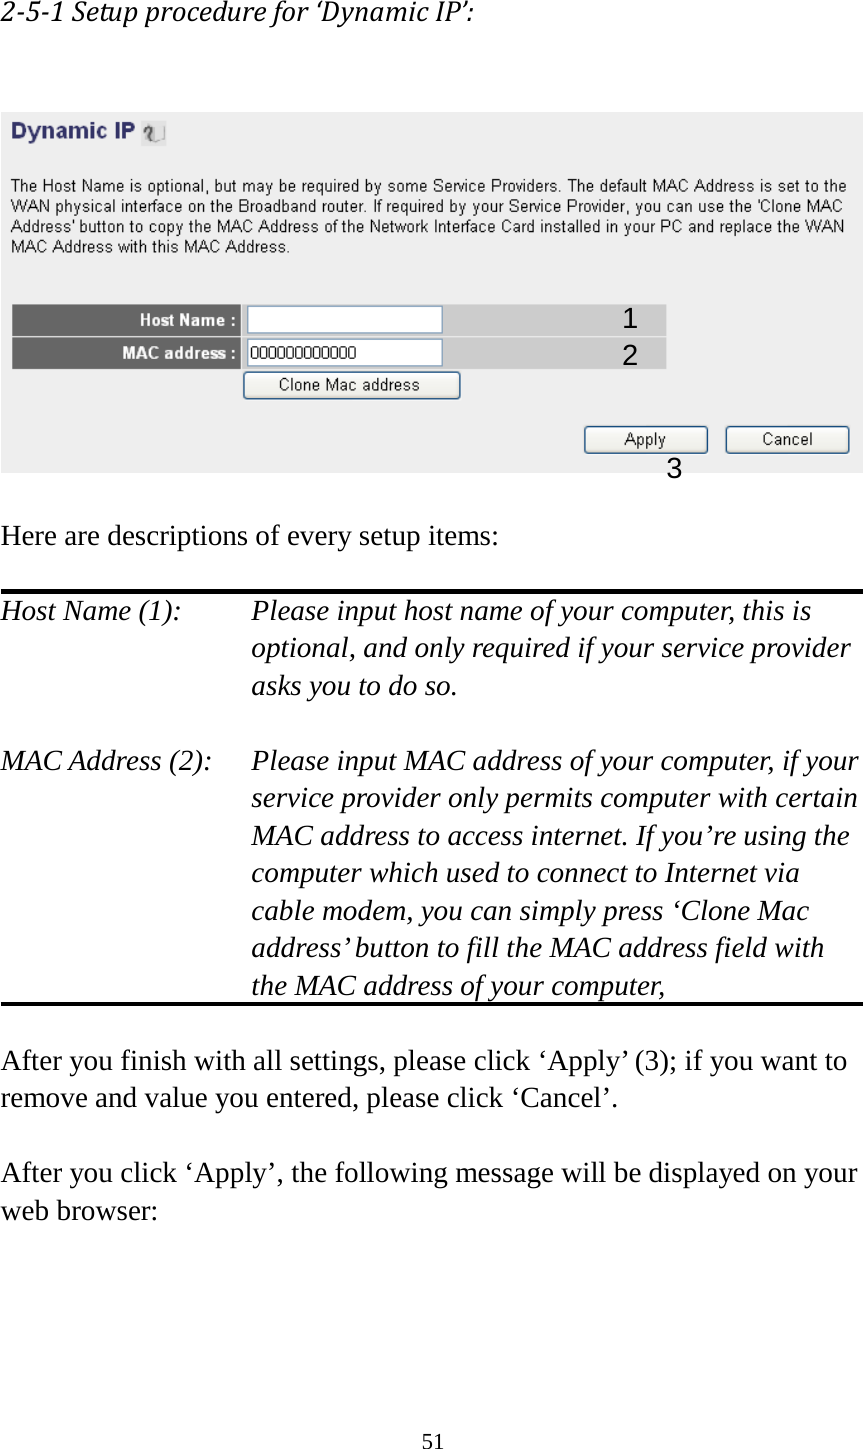 51 2-5-1 Setup procedure for ‘Dynamic IP’:    Here are descriptions of every setup items:  Host Name (1):   Please input host name of your computer, this is optional, and only required if your service provider asks you to do so.    MAC Address (2):    Please input MAC address of your computer, if your service provider only permits computer with certain MAC address to access internet. If you’re using the computer which used to connect to Internet via cable modem, you can simply press ‘Clone Mac address’ button to fill the MAC address field with the MAC address of your computer,    After you finish with all settings, please click ‘Apply’ (3); if you want to remove and value you entered, please click ‘Cancel’.  After you click ‘Apply’, the following message will be displayed on your web browser:  1 2 3 